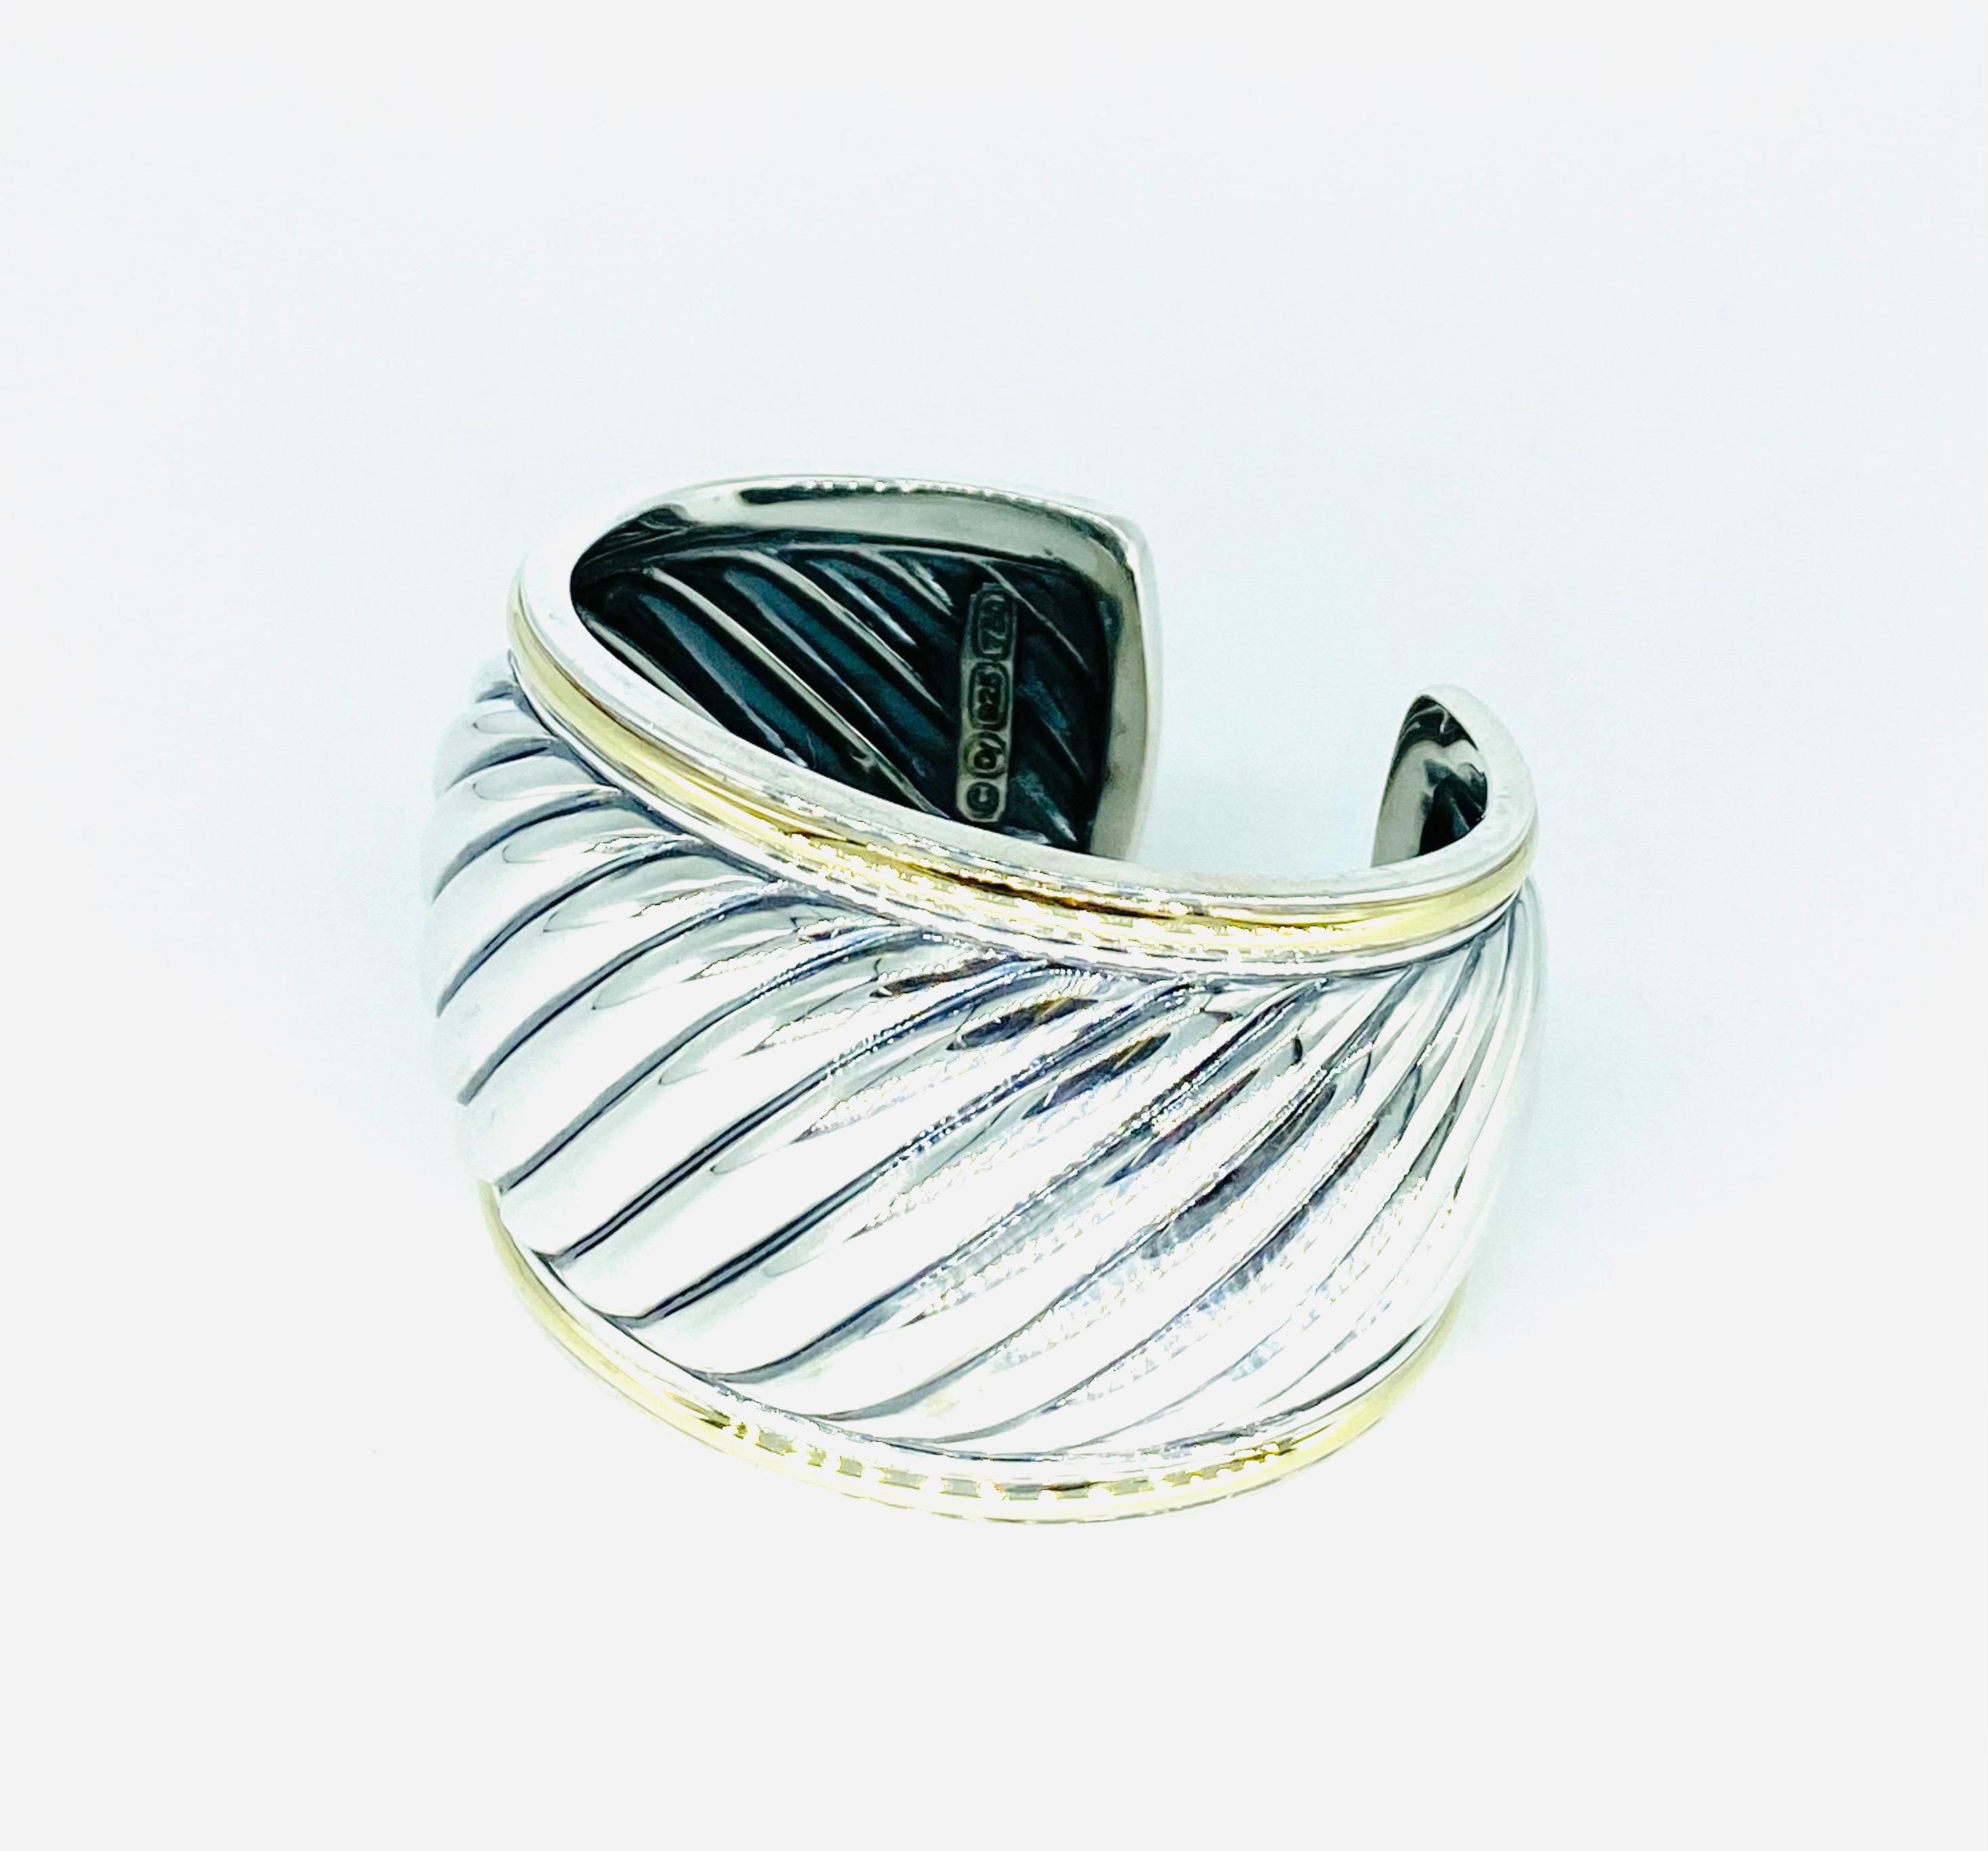 David Yurman Wide Two-Tone Sterling Silver & 18k Gold Cuff Cable Bangle. Beautiful bangle by famous designer David Yurman. You can see by the design why it is so sought after. Just incredible piece you stay amazed staring at. The bangle weights 66